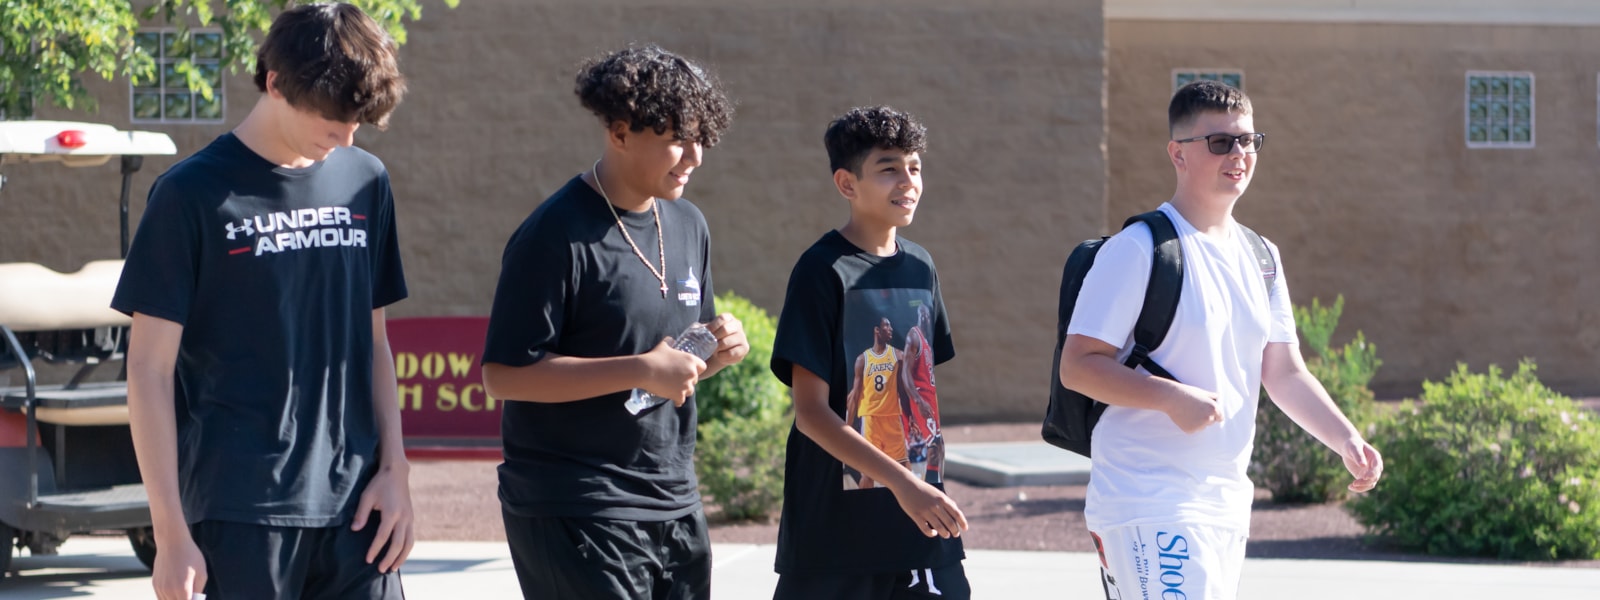 4 males students walking on campus